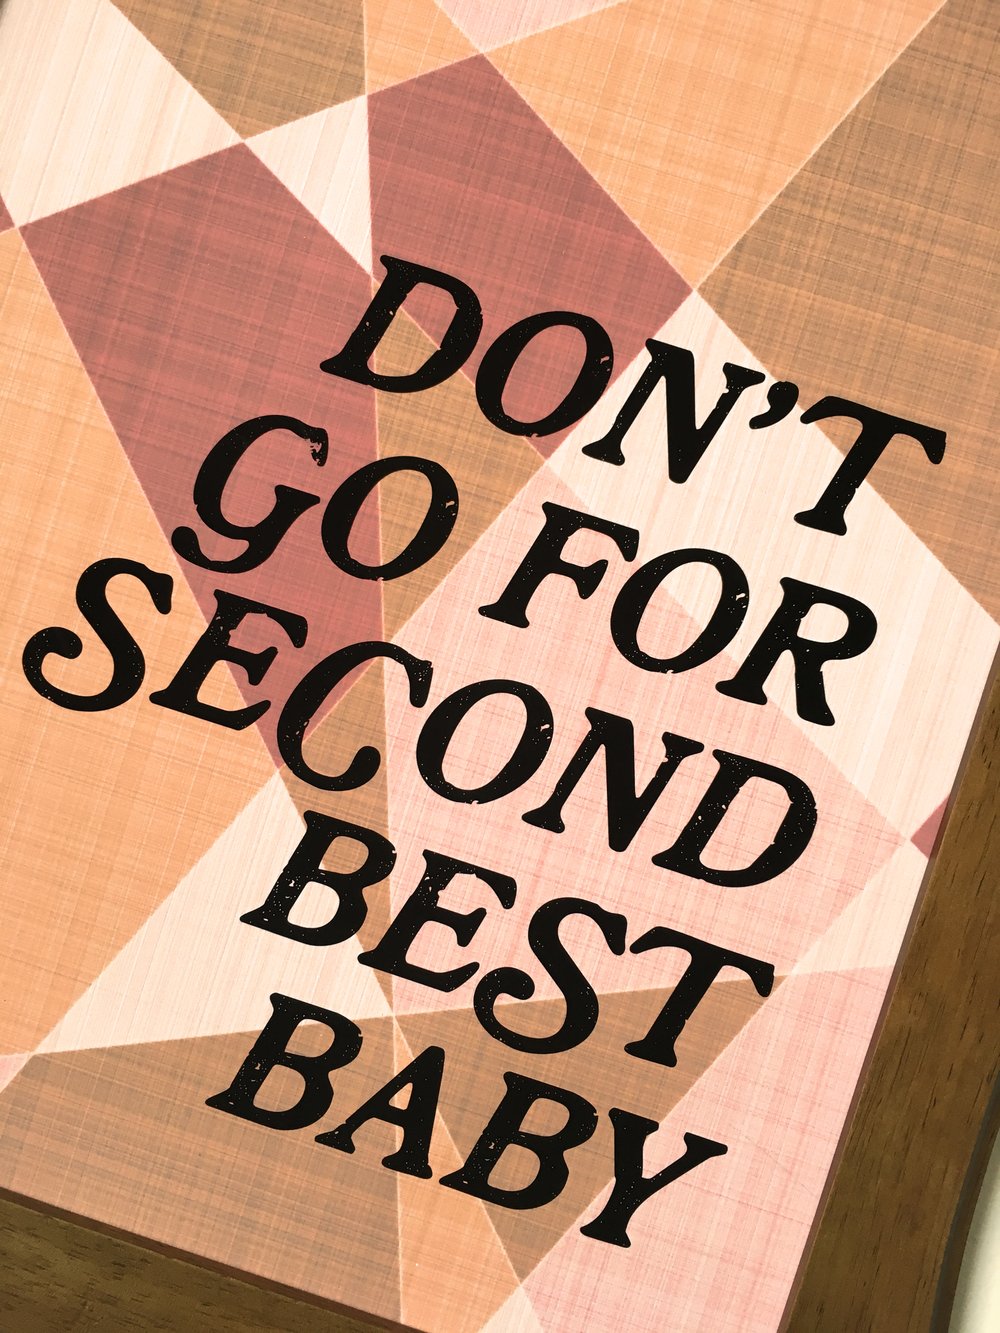 Don't go for Second Best Baby-11 x 14 print